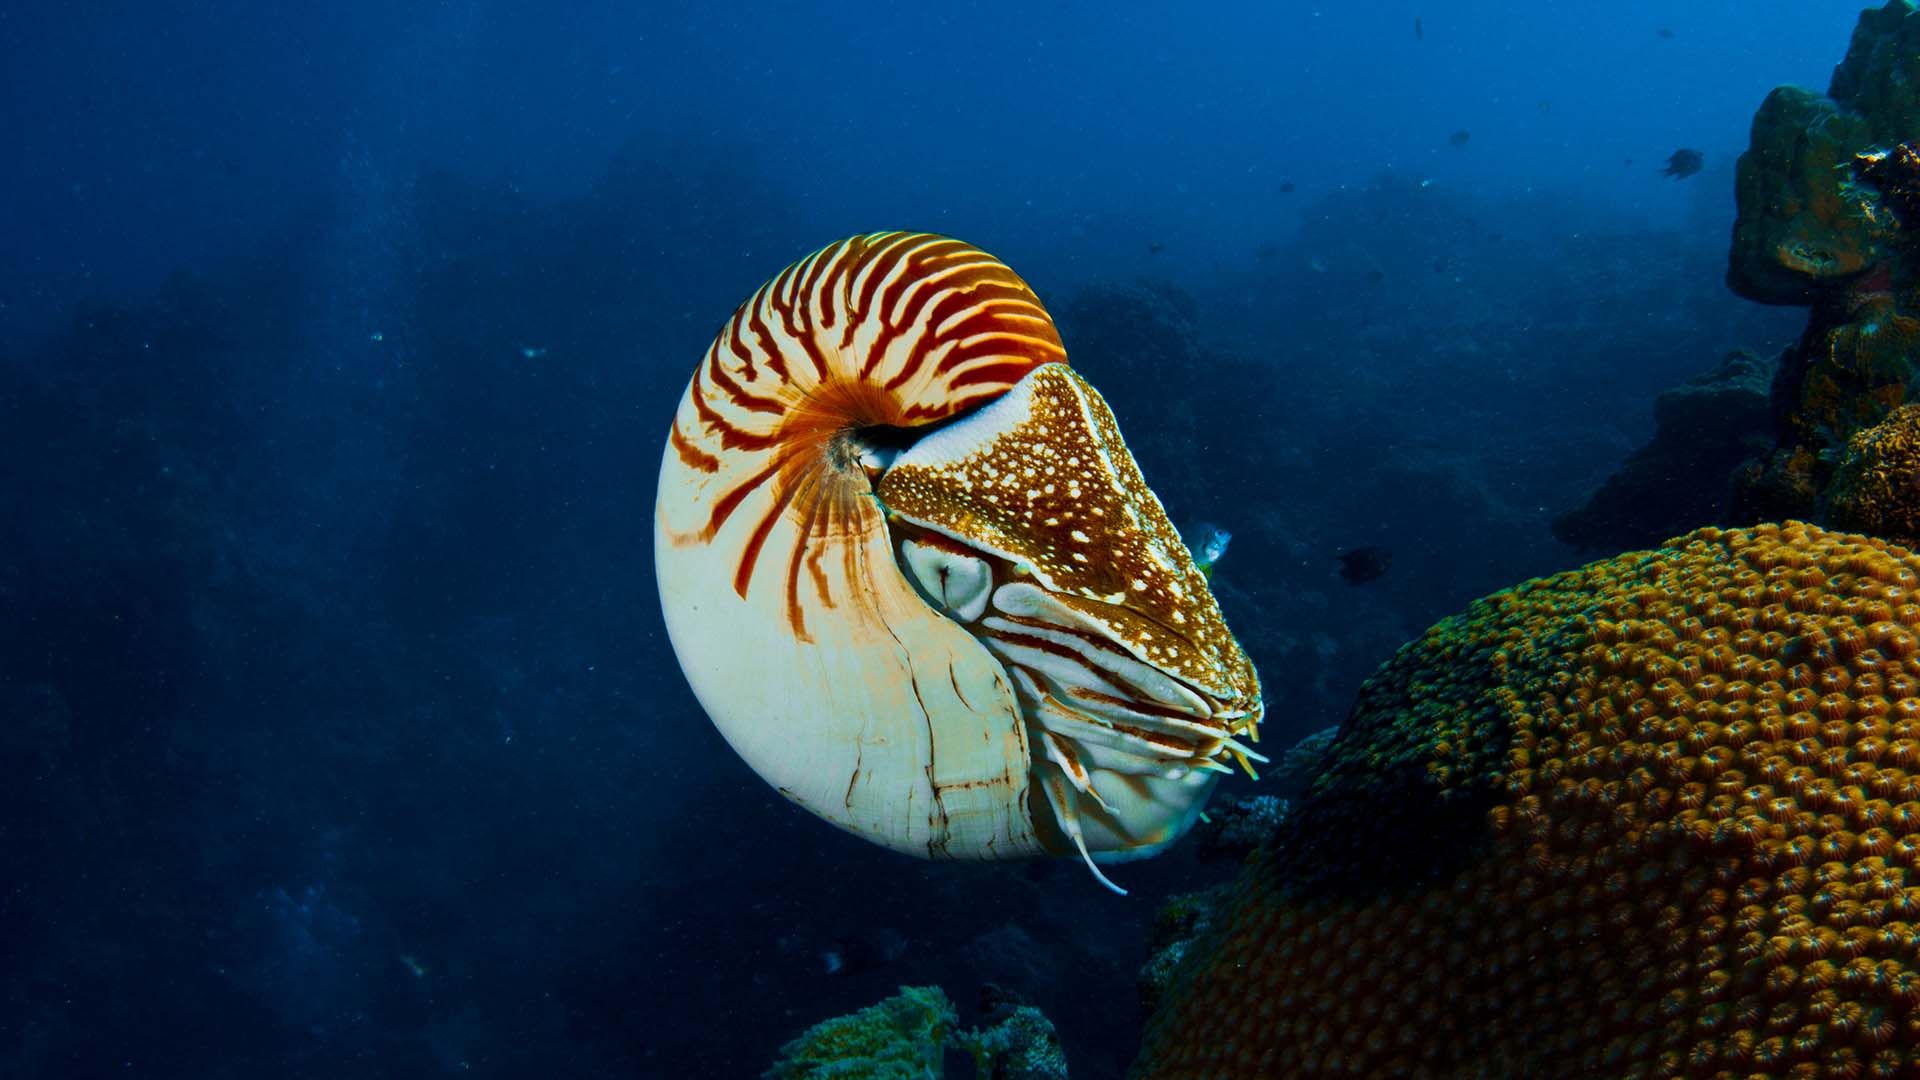 The chambered nautilus has a specialized siphon that it uses to propel itself through the water (© Getty Images)